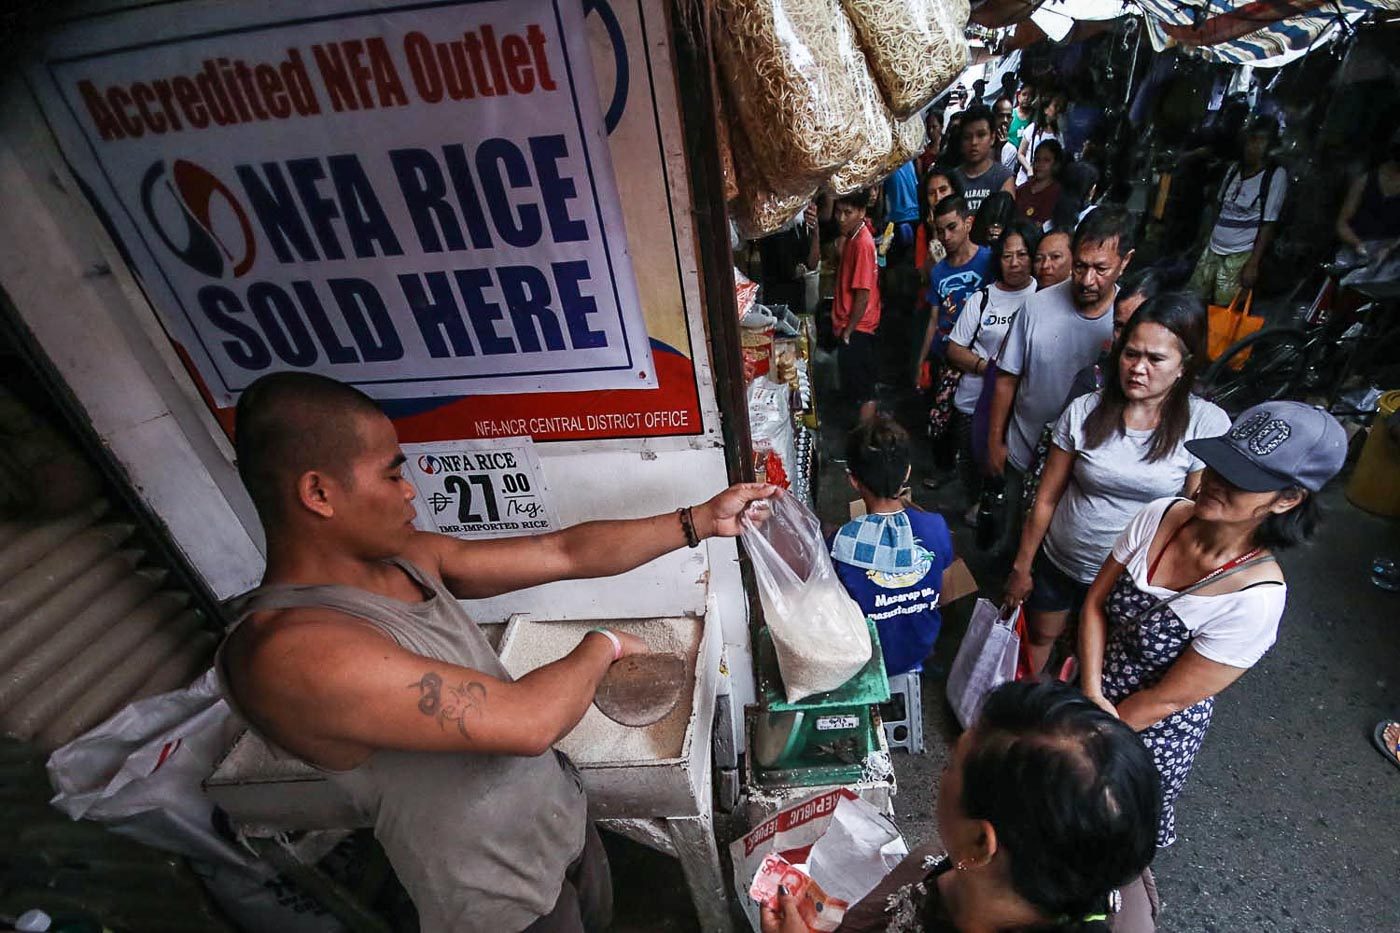 FAST FACTS: Rice prices in the Philippines